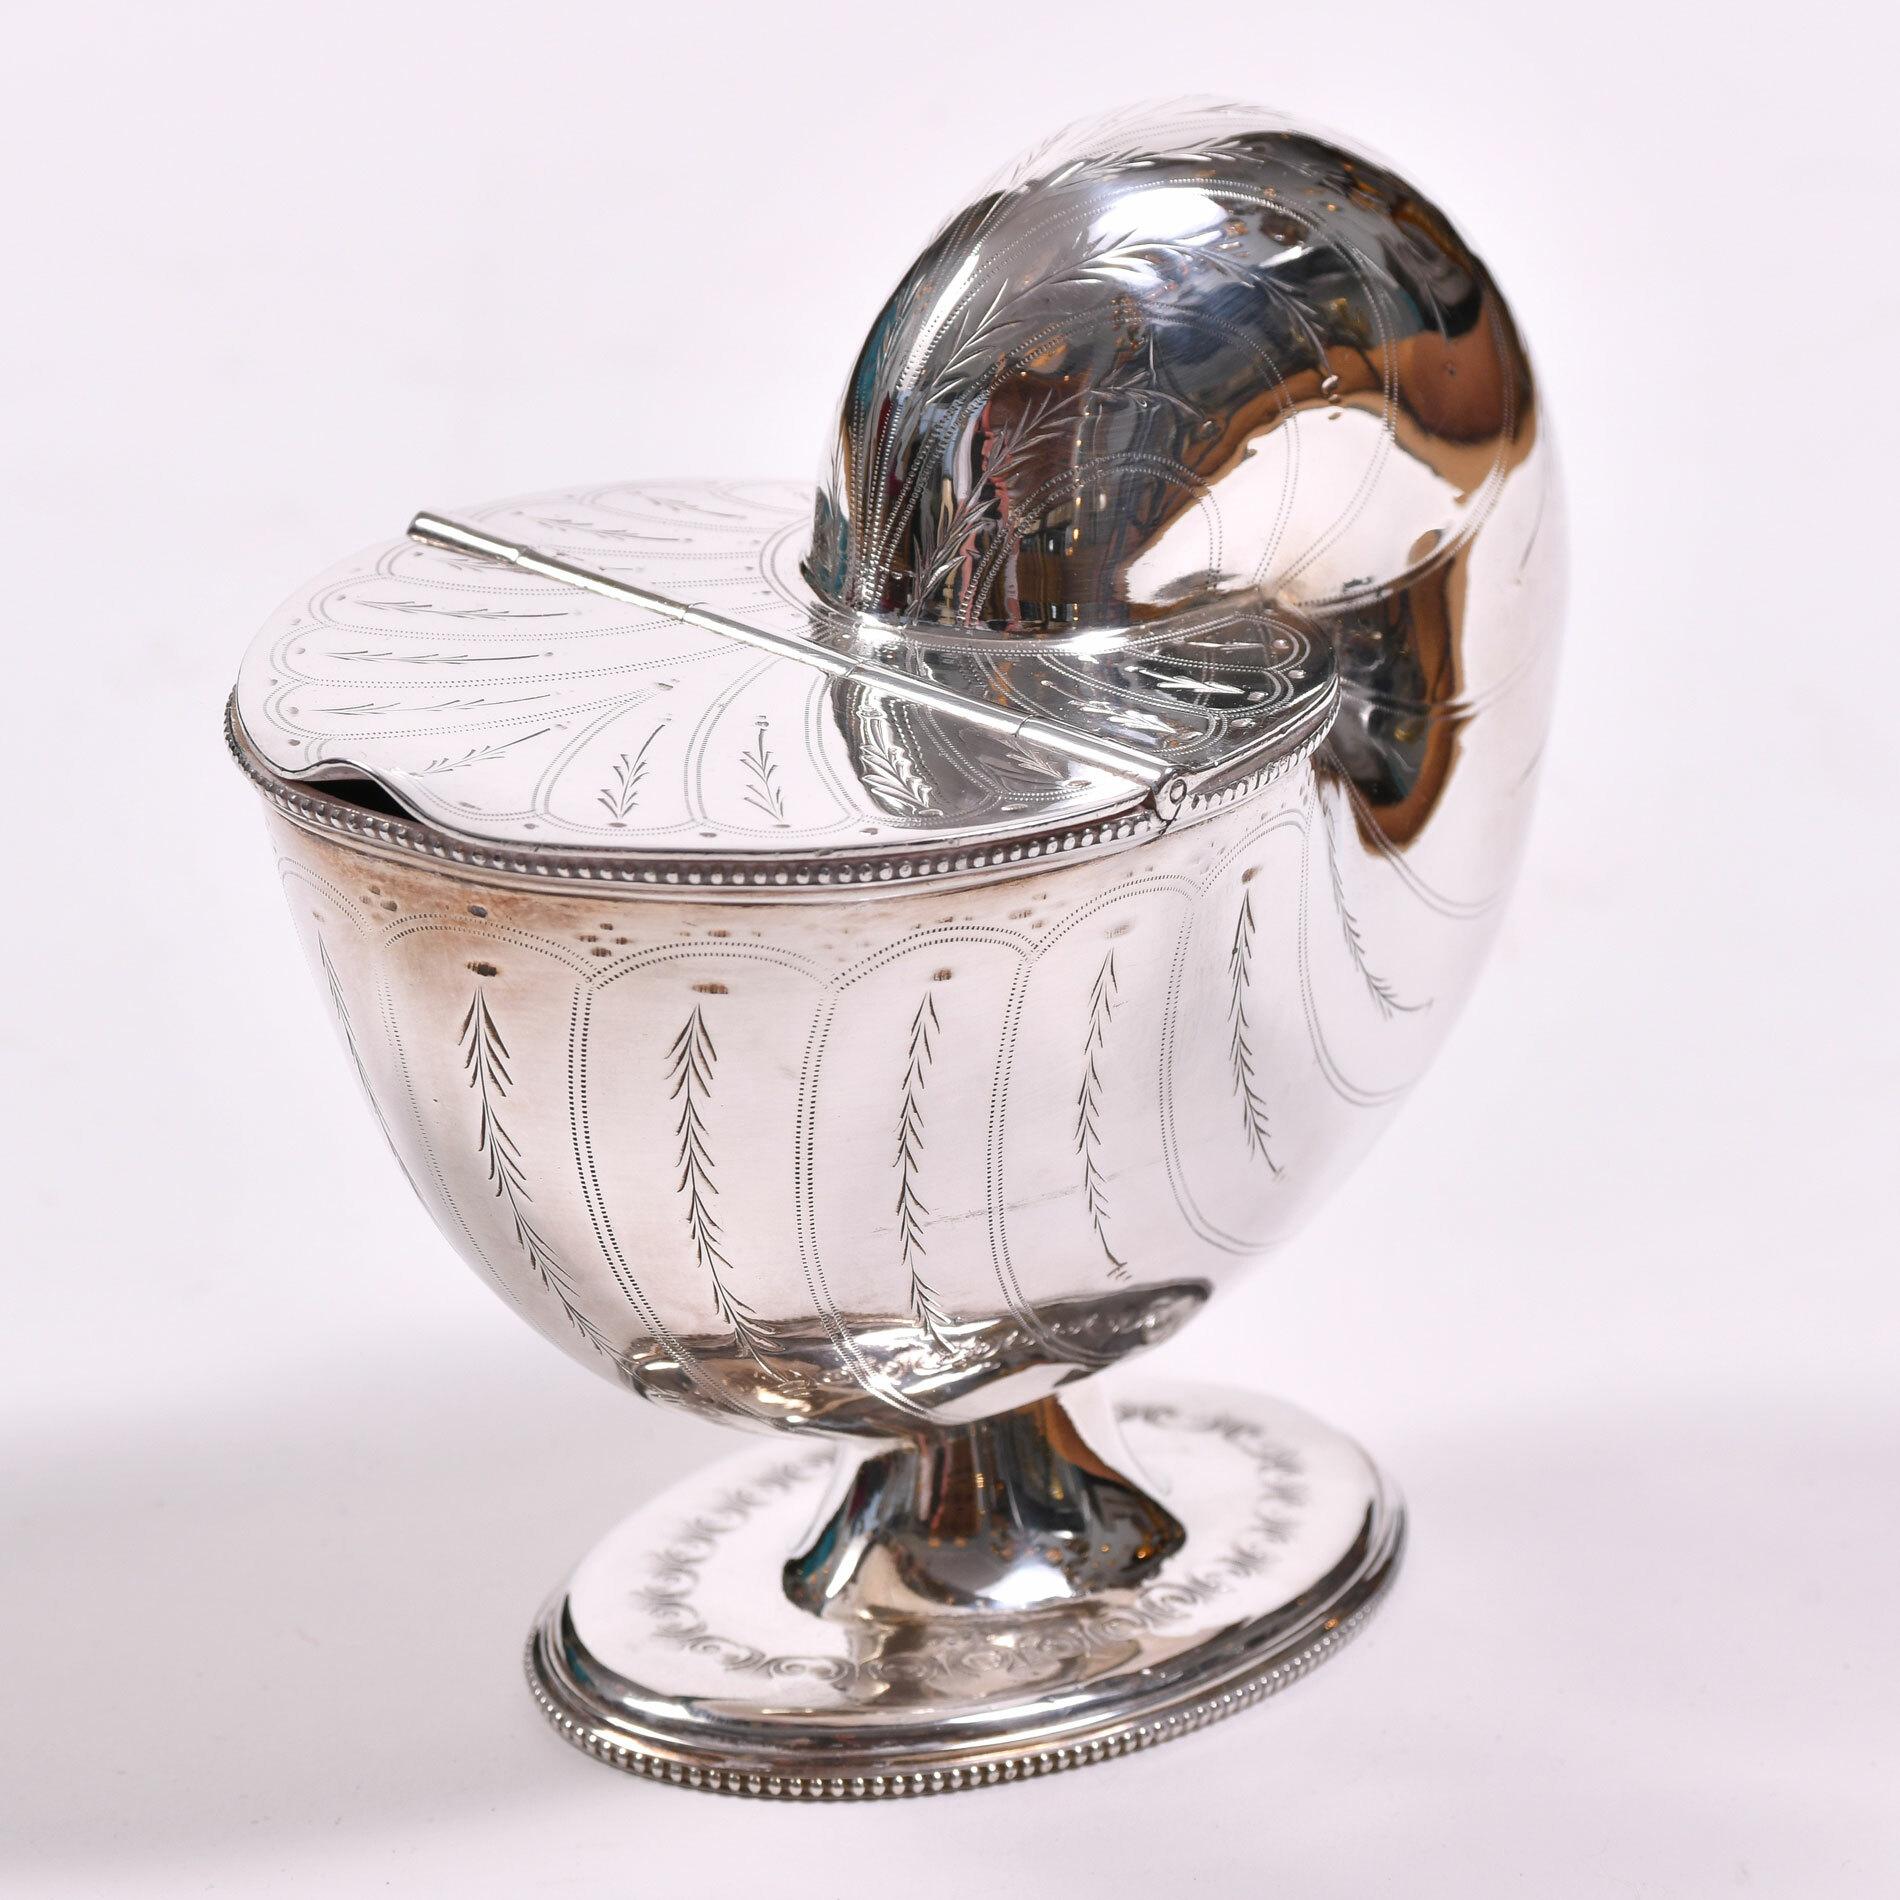 England, circa 1880s, silver plated, in the form of a large shell on a circular base, the slim lid lifting to reveal a small compartment inside. 

The Victorians used these as spoon warmers, but would make a perfect dressing table accessory.